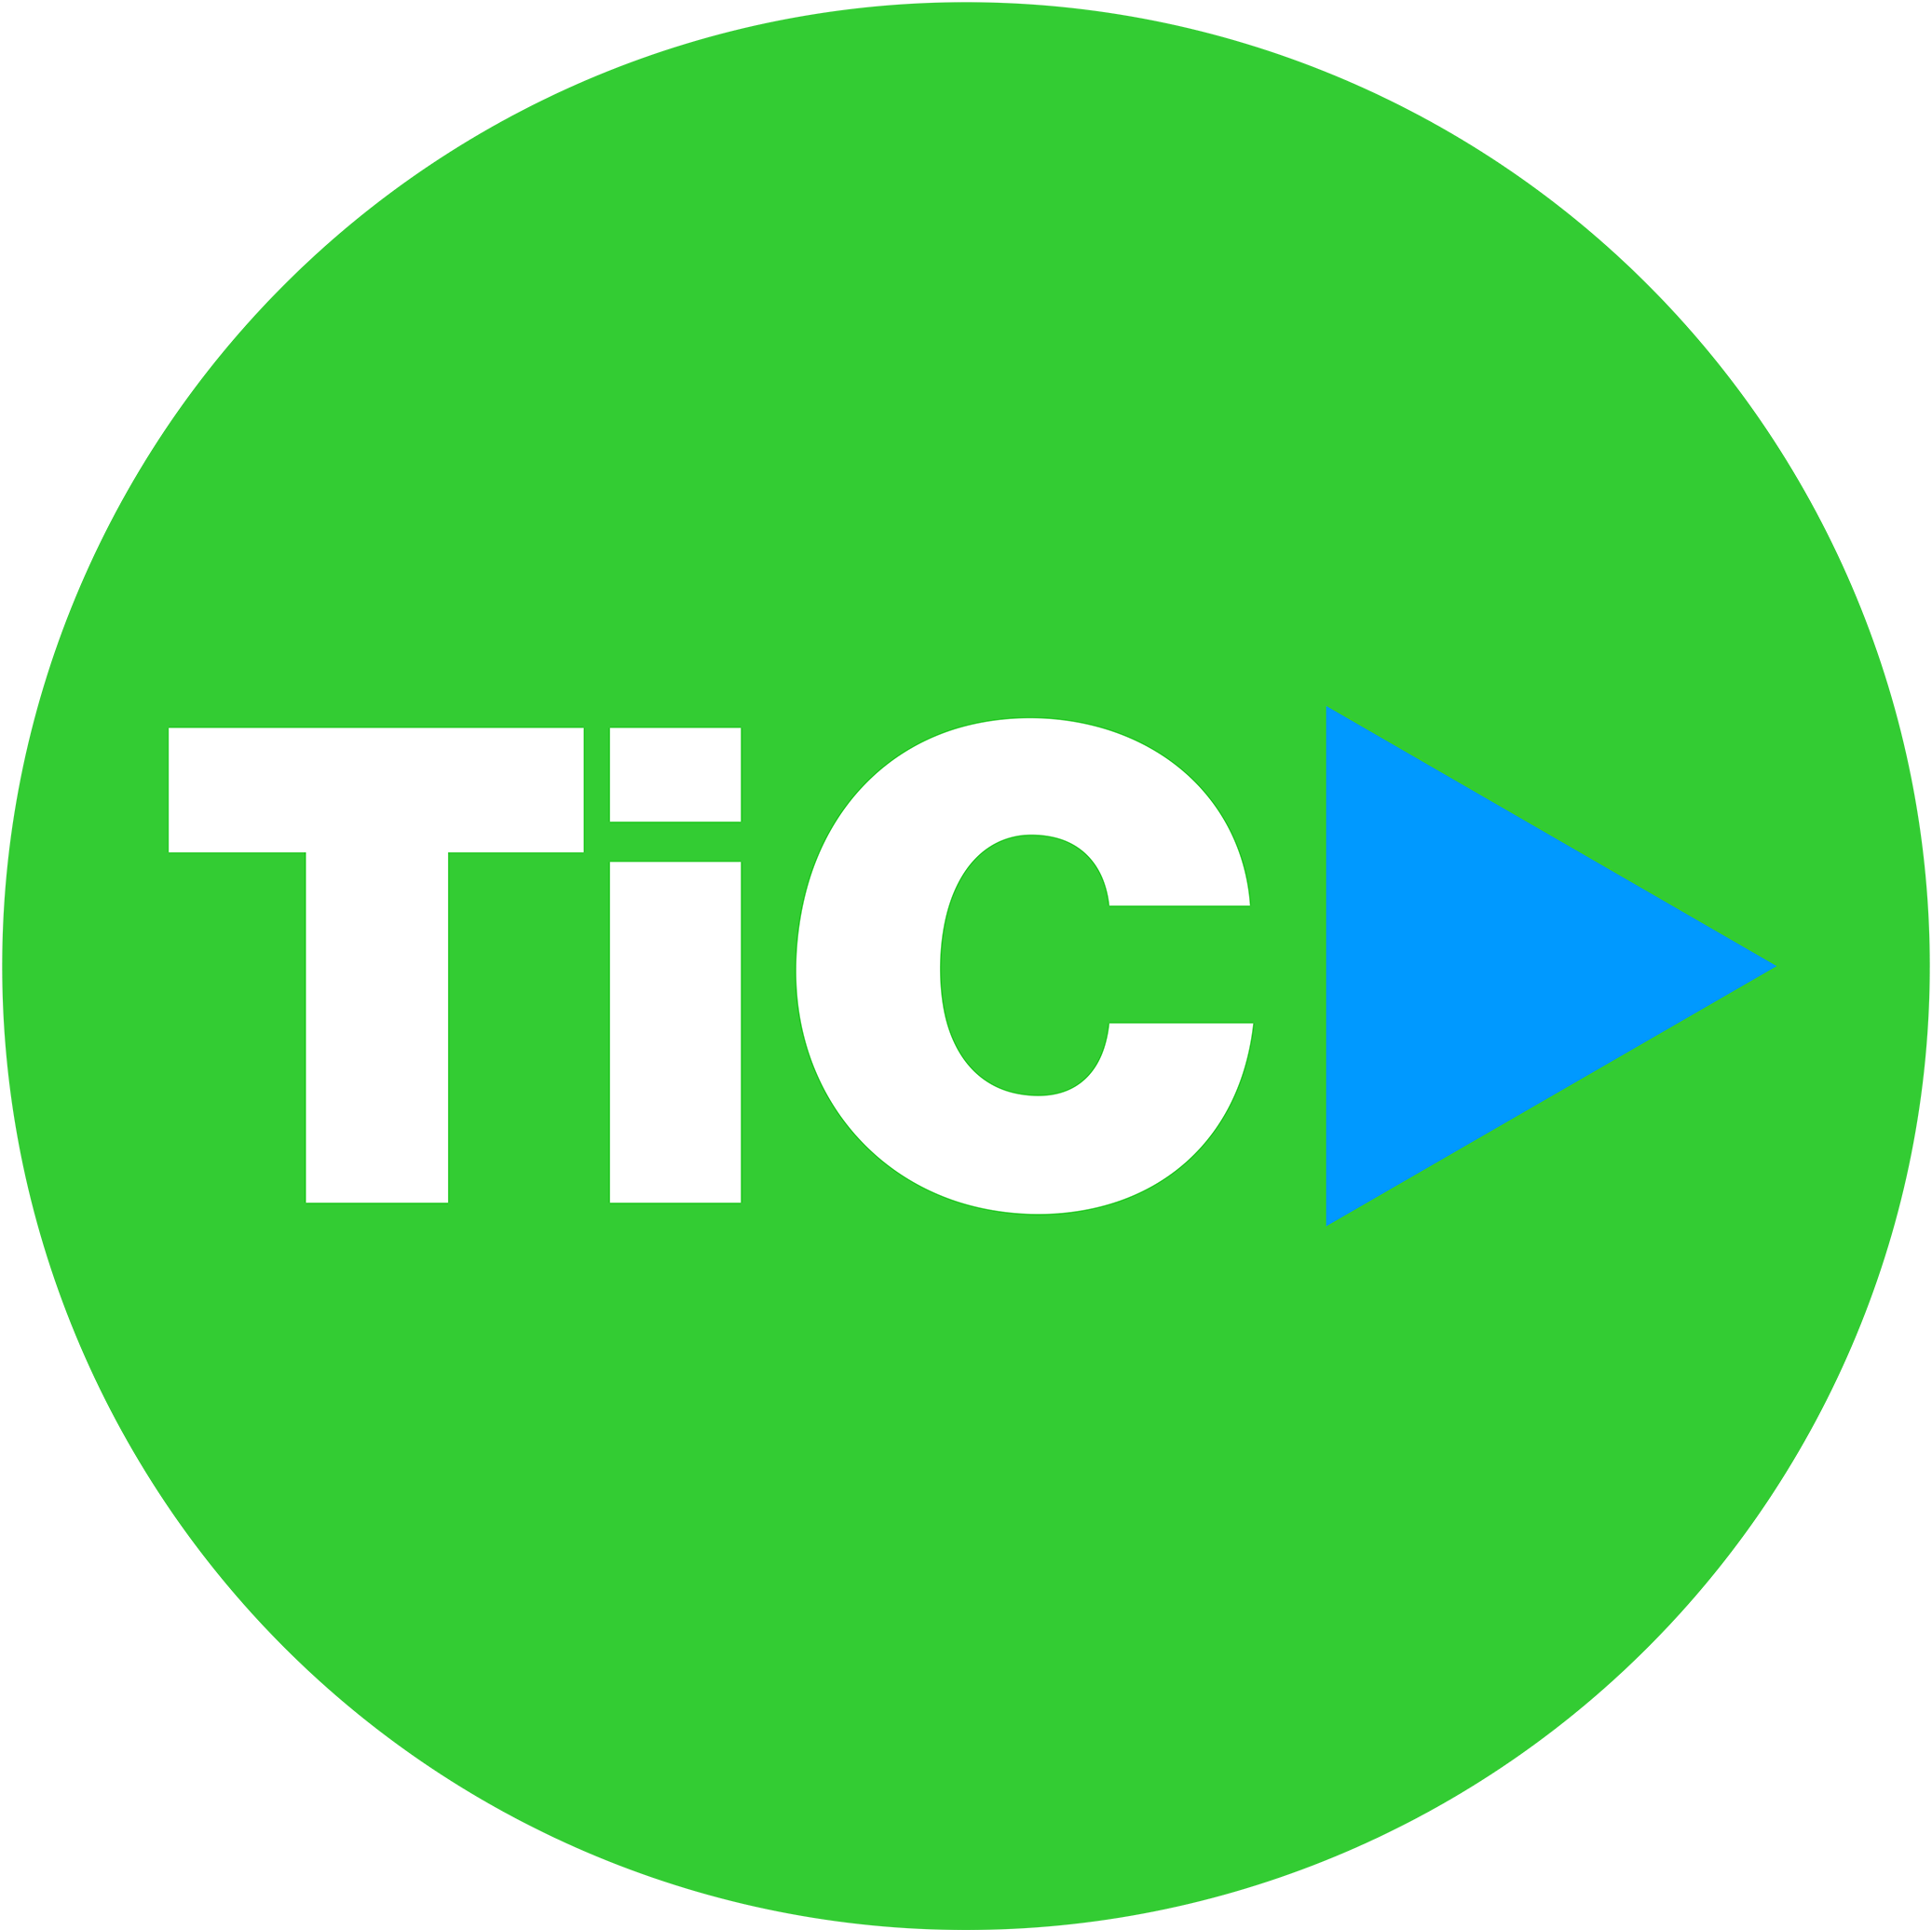 About TiC